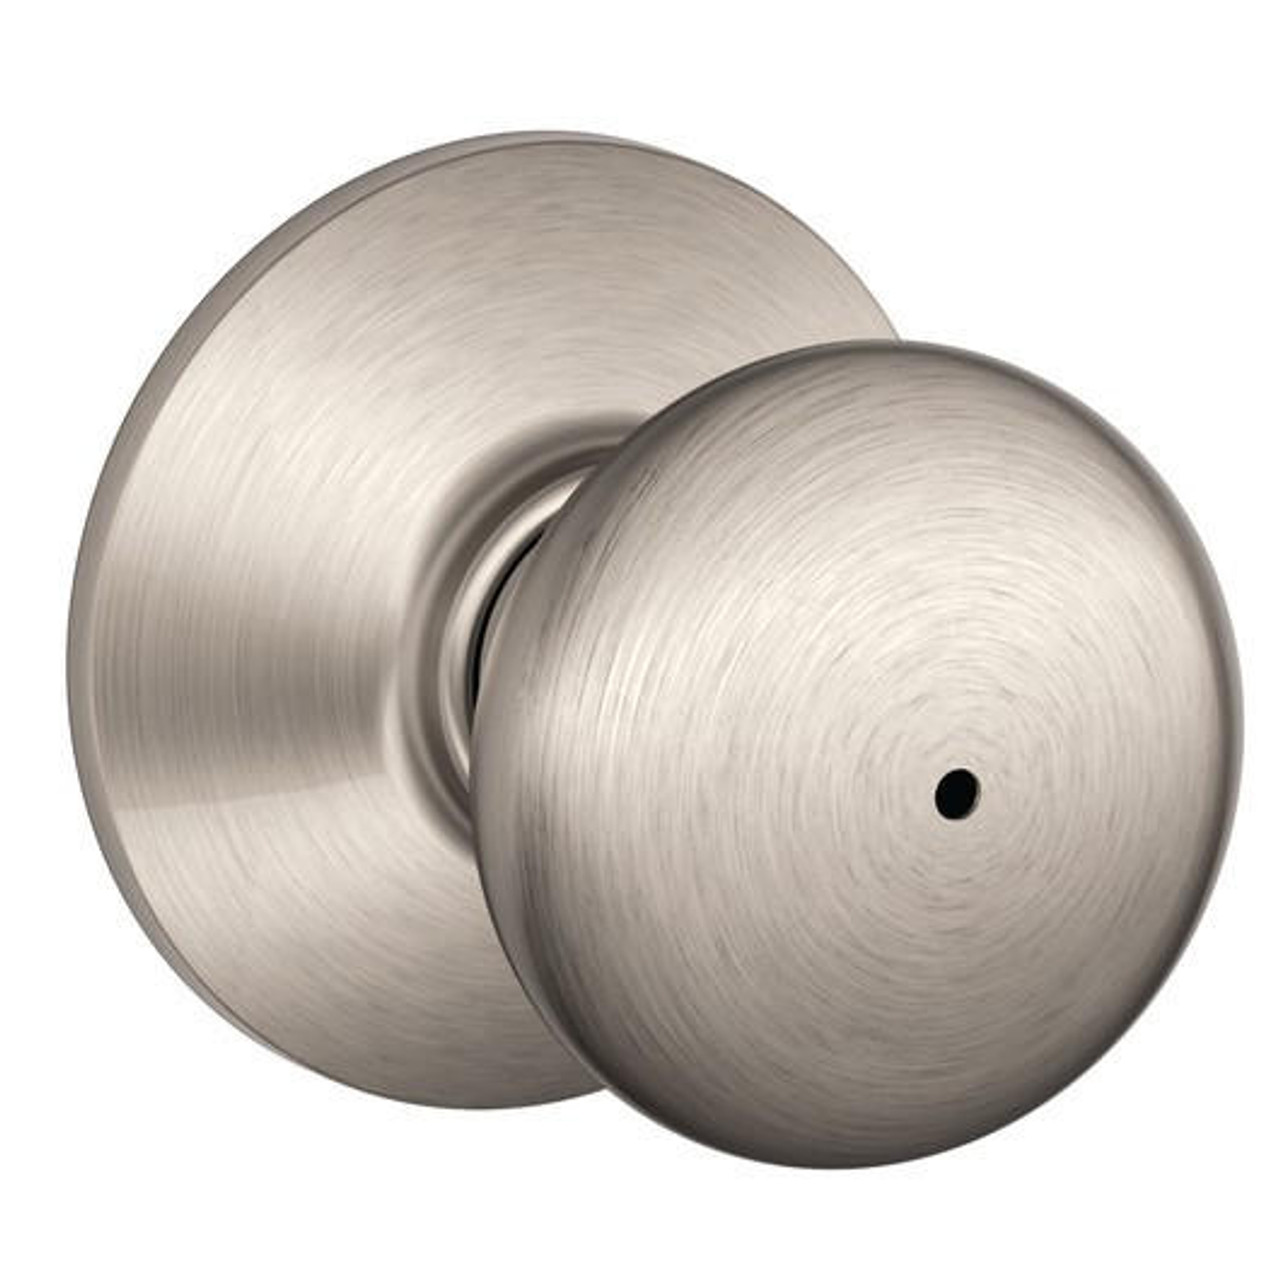 Schlage Lock Schlage F40 Series Privacy Knob Plymouth Series with a Standard Rosette 